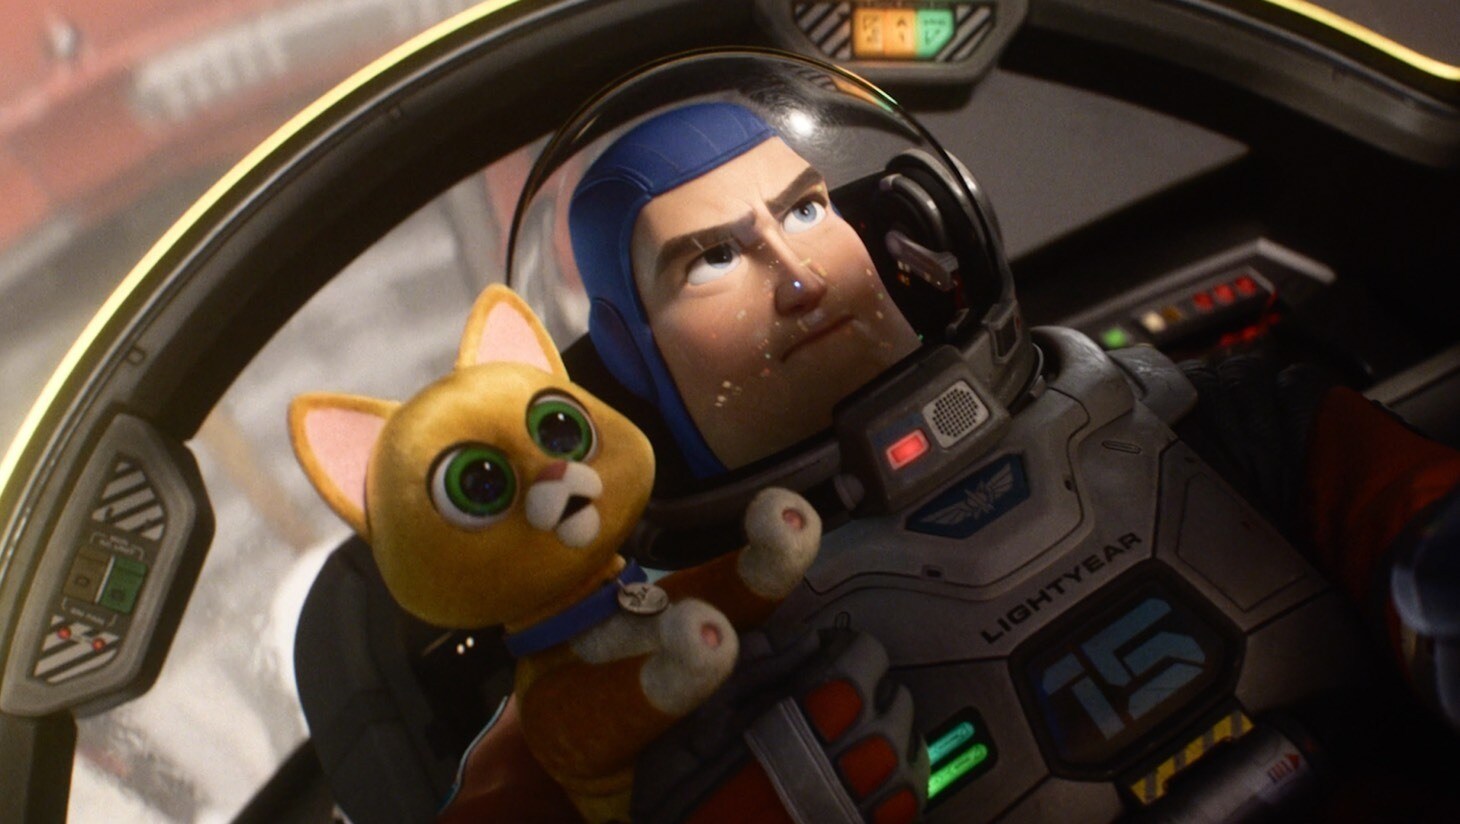 Animated character Buzz Lightyear and his cat in the cockpit from Disney and Pixar's Lightyear